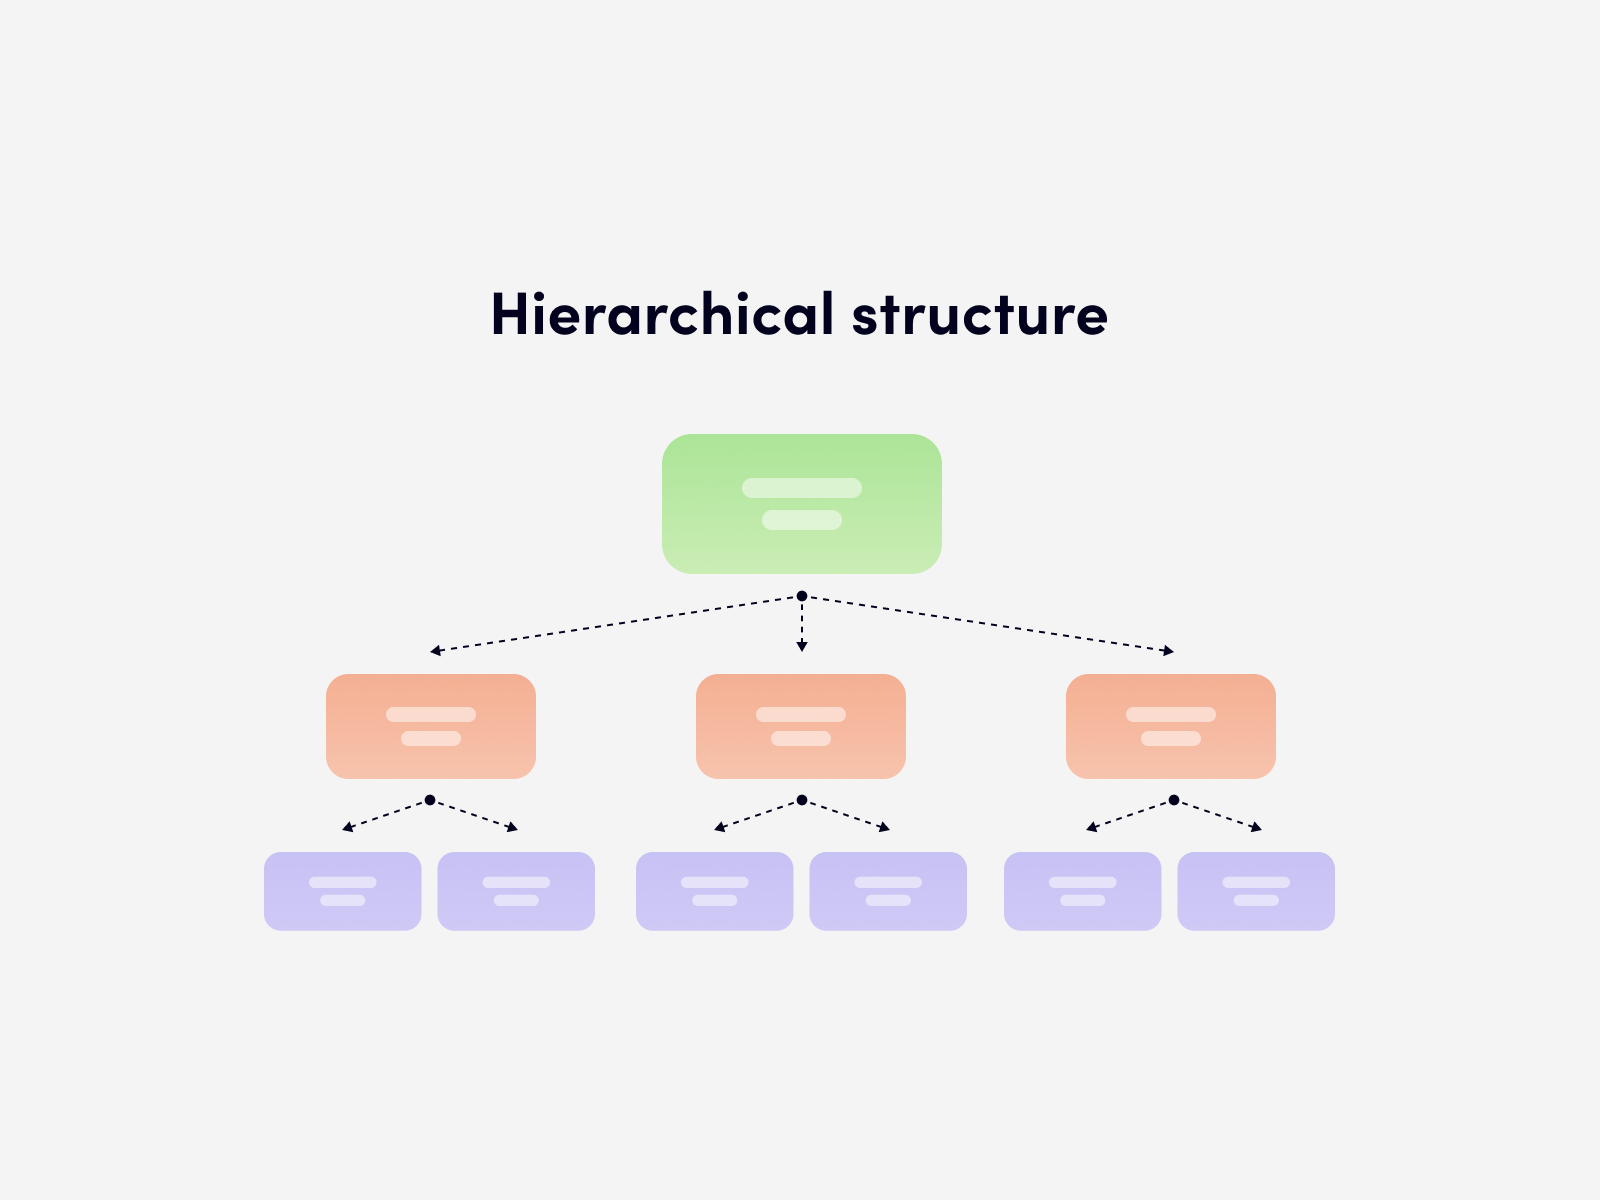 The hierarchical structure includes parent and child pages